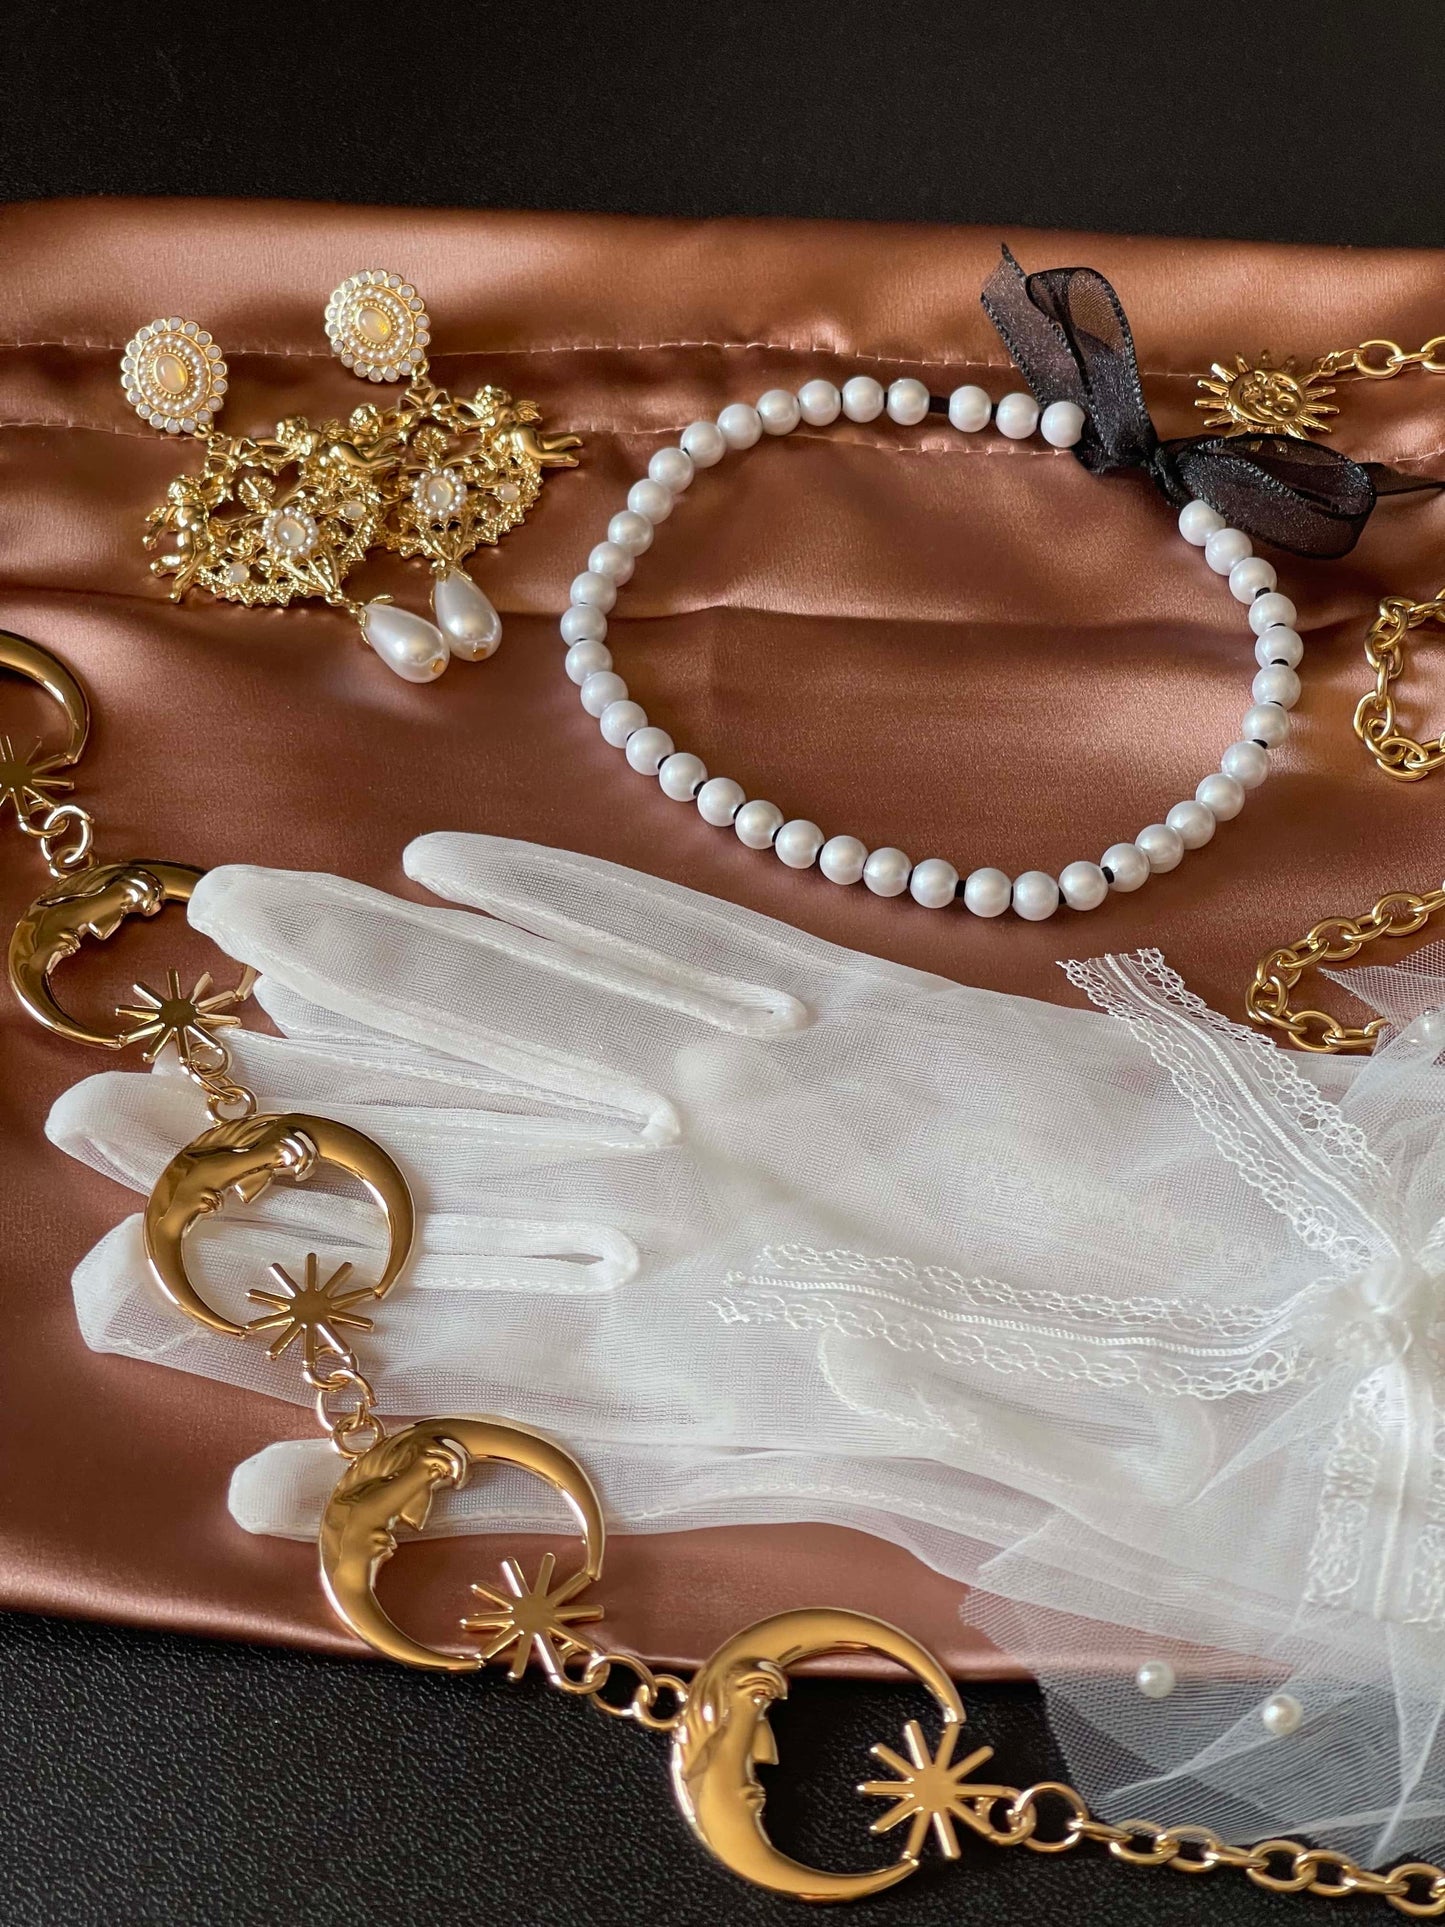 An array of historically inspired accessories - pearl necklace, moon belt, baroque earrings, and chiffon gloves on a satin bag, displaying a possible mystery bag combo.